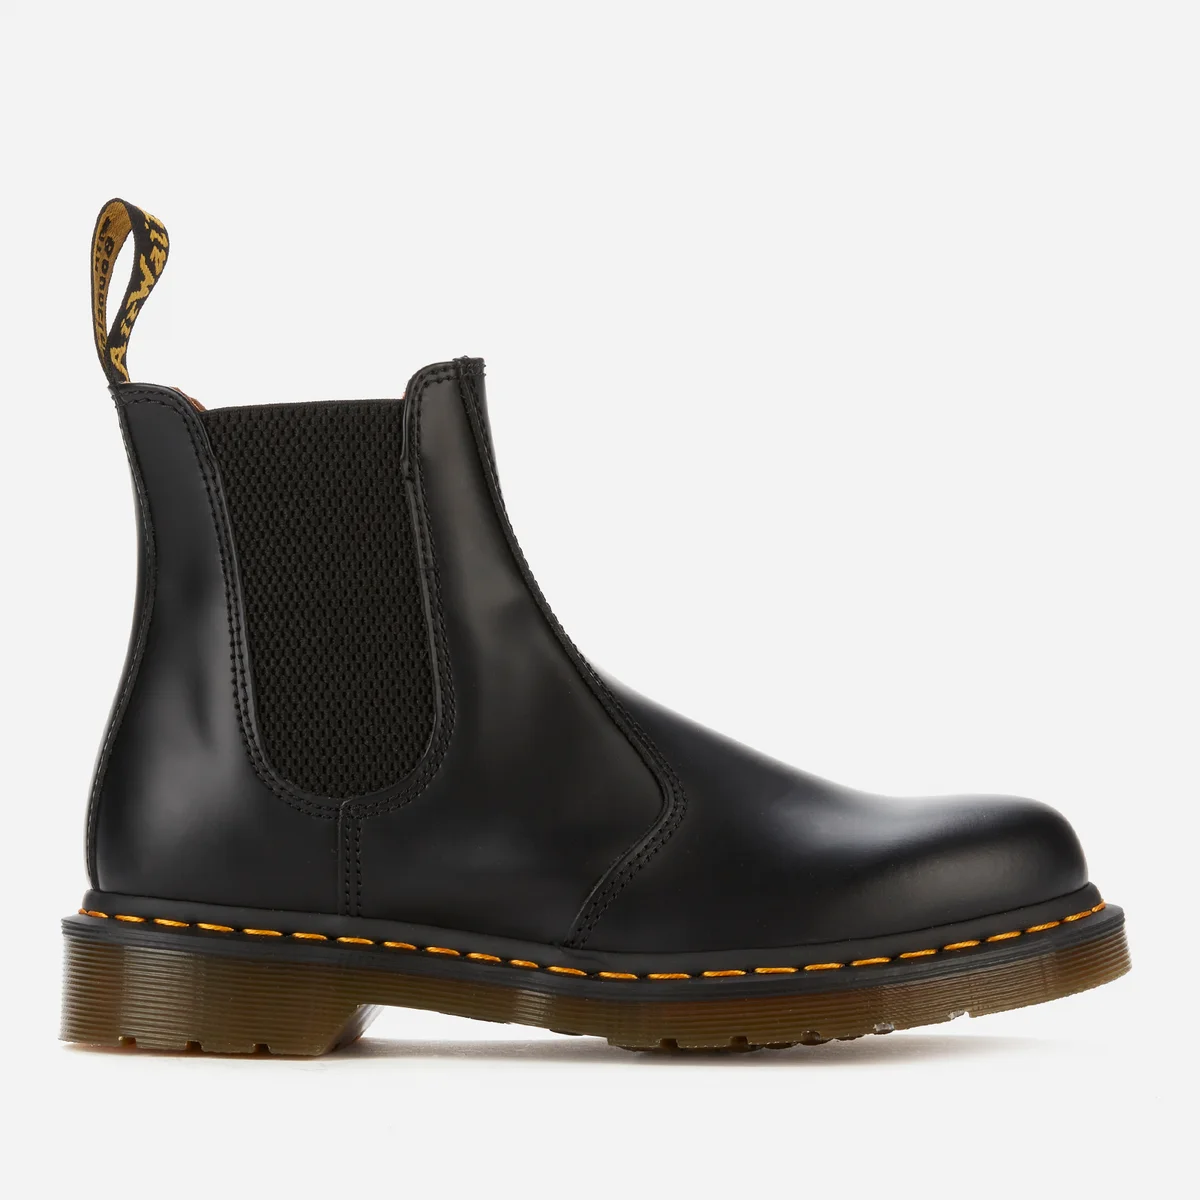 Dr. Martens 2976 Smooth Leather Chelsea Boots - Black Image 1